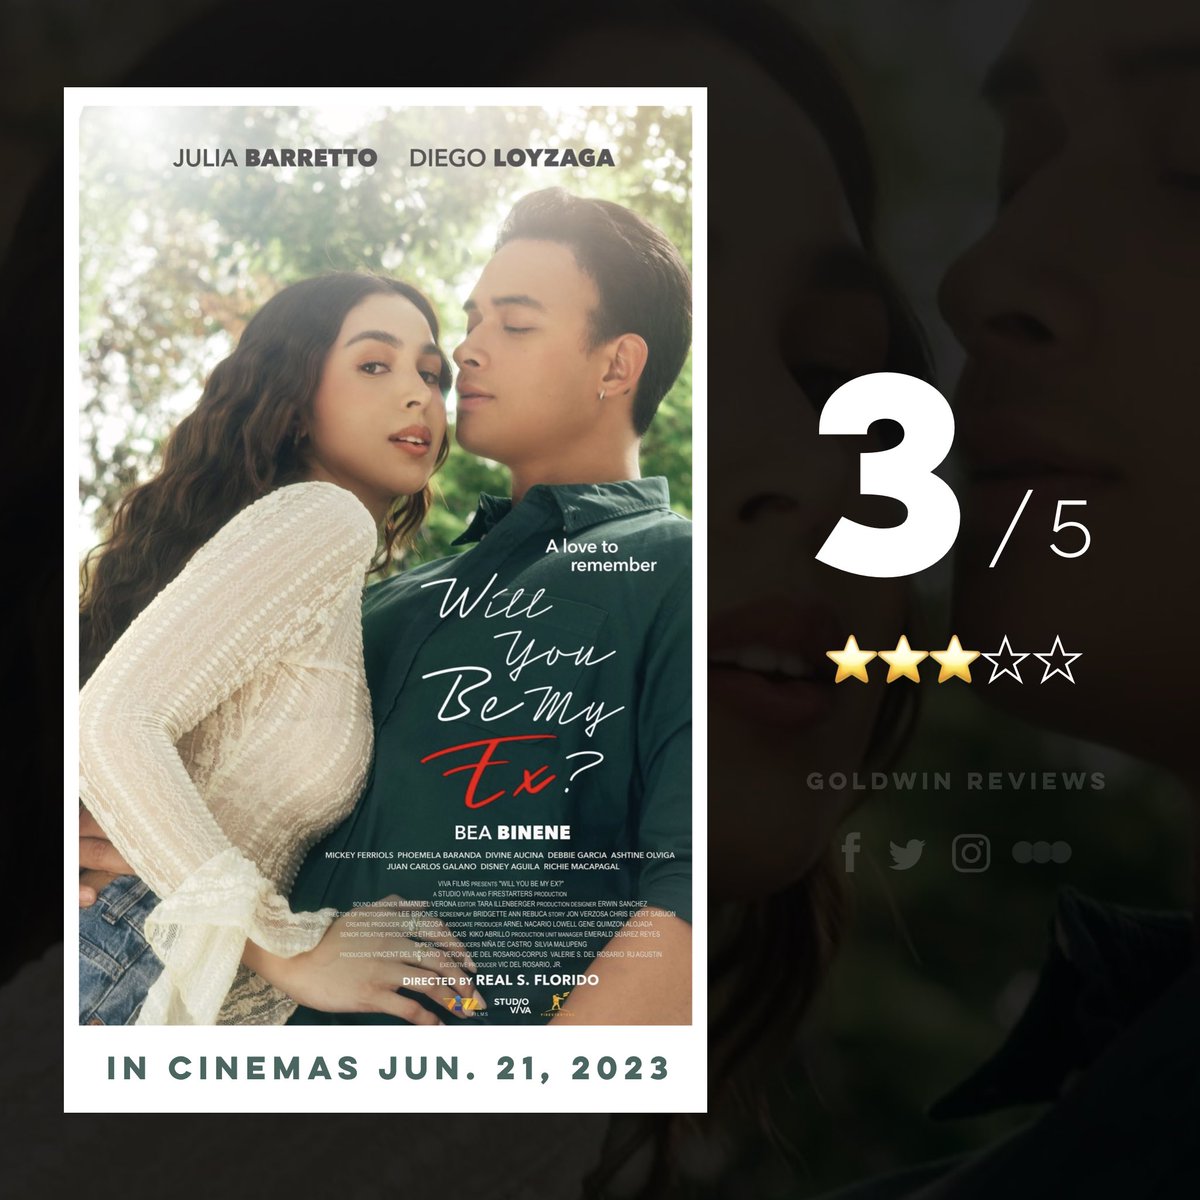 Will You Be My Ex? (2023)
Directed by: Real Florido

- A MOVIE REVIEW THREAD -

#goldwinreviews #RealFlorido #JuliaBarretto #DiegoLoyzaga #BeaBinene #JuanCarlosGalano #DivineAucina #grWillYouBeMyEx #WillYouBeMyEx